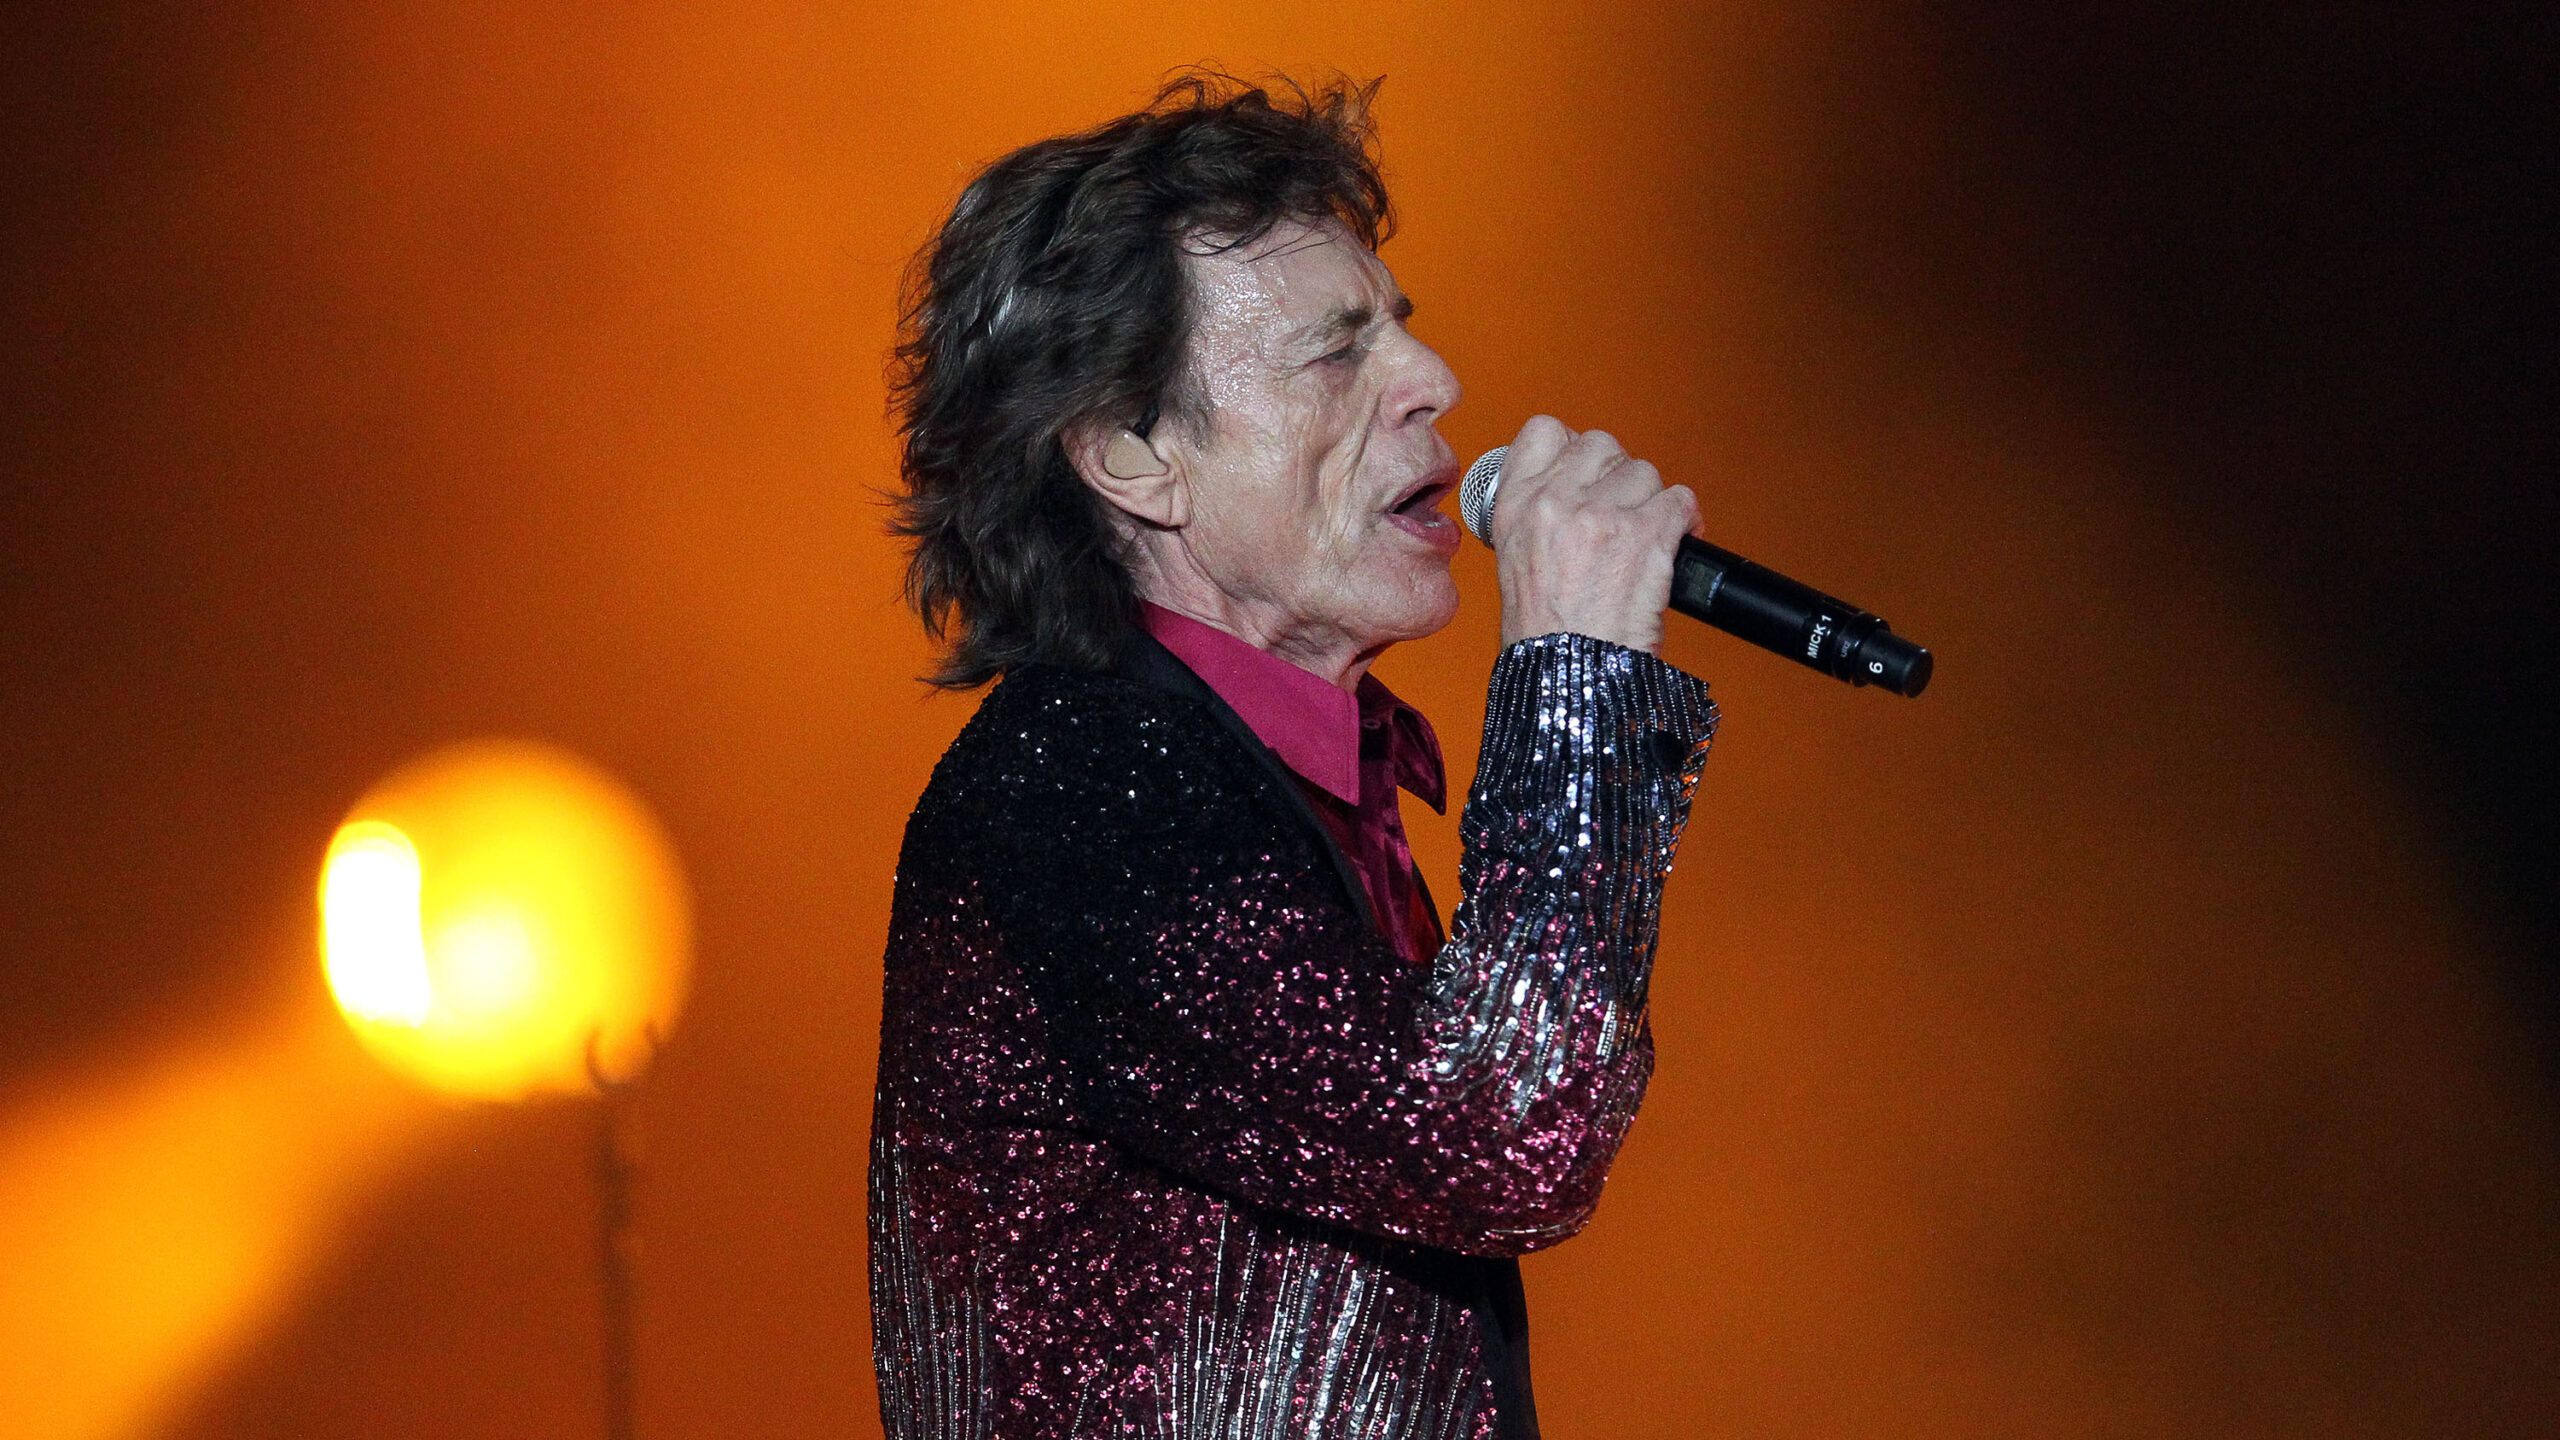 Mick Jagger to be father again at 72